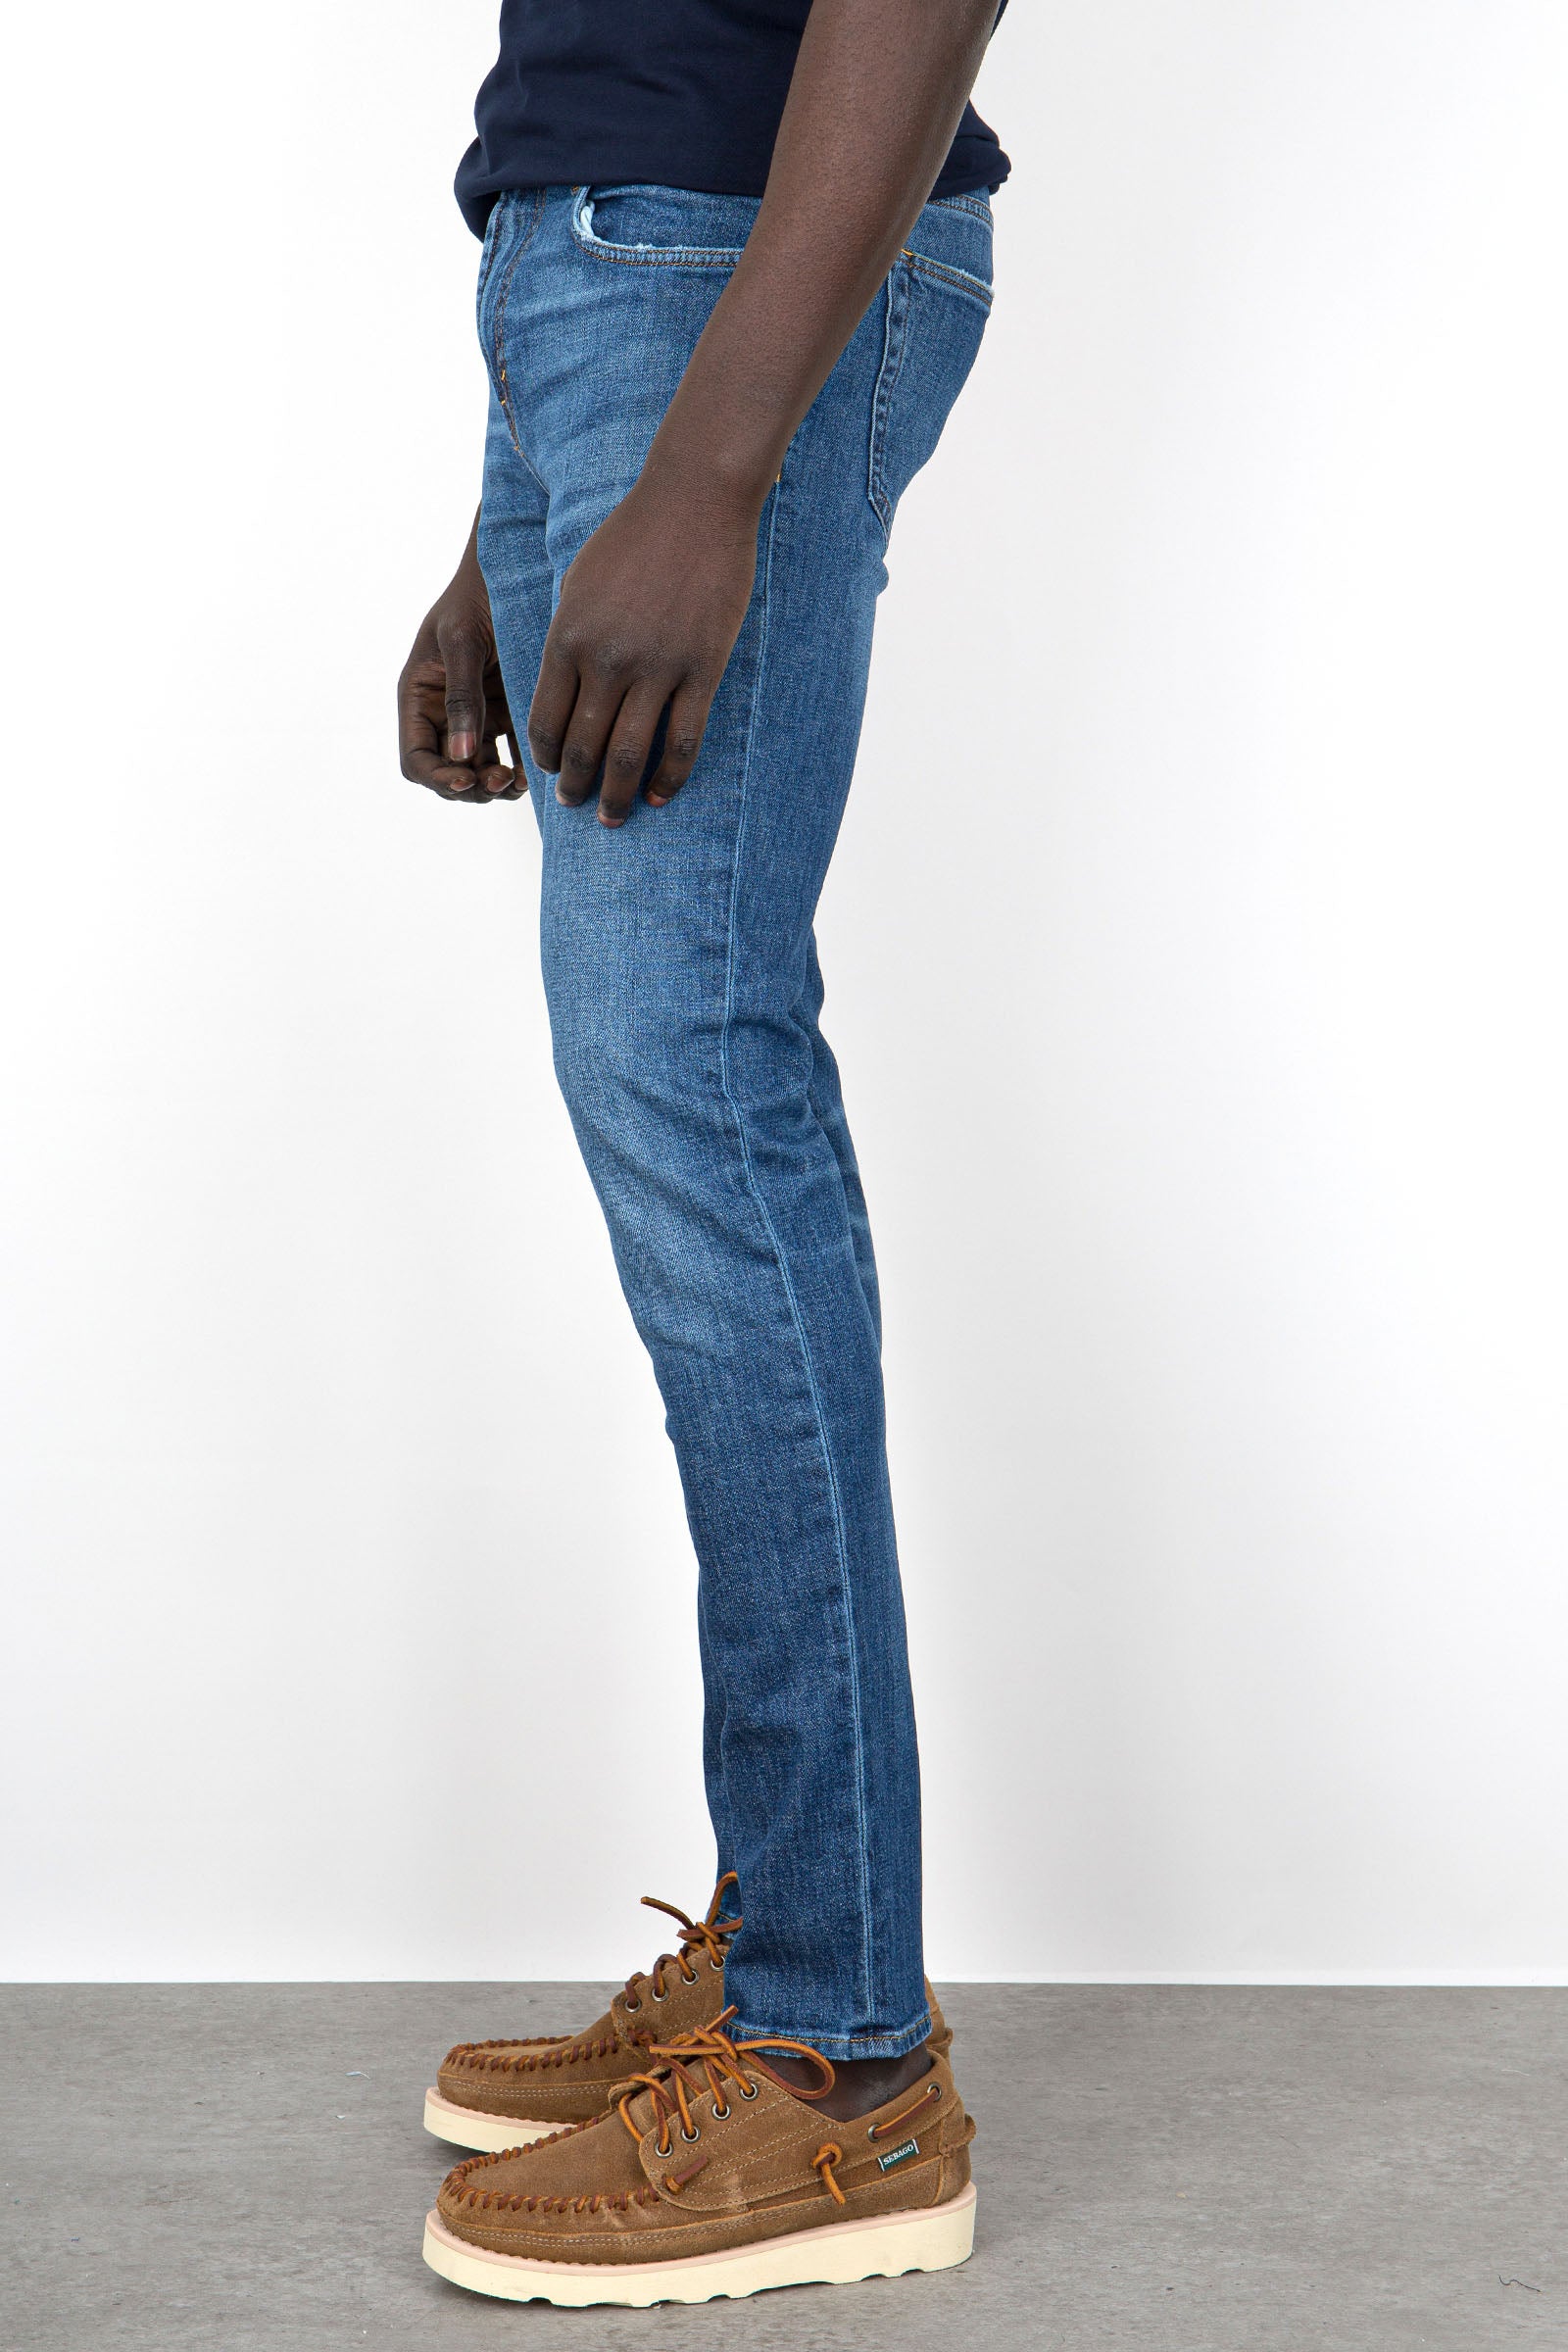 Skeith Jeans - 4